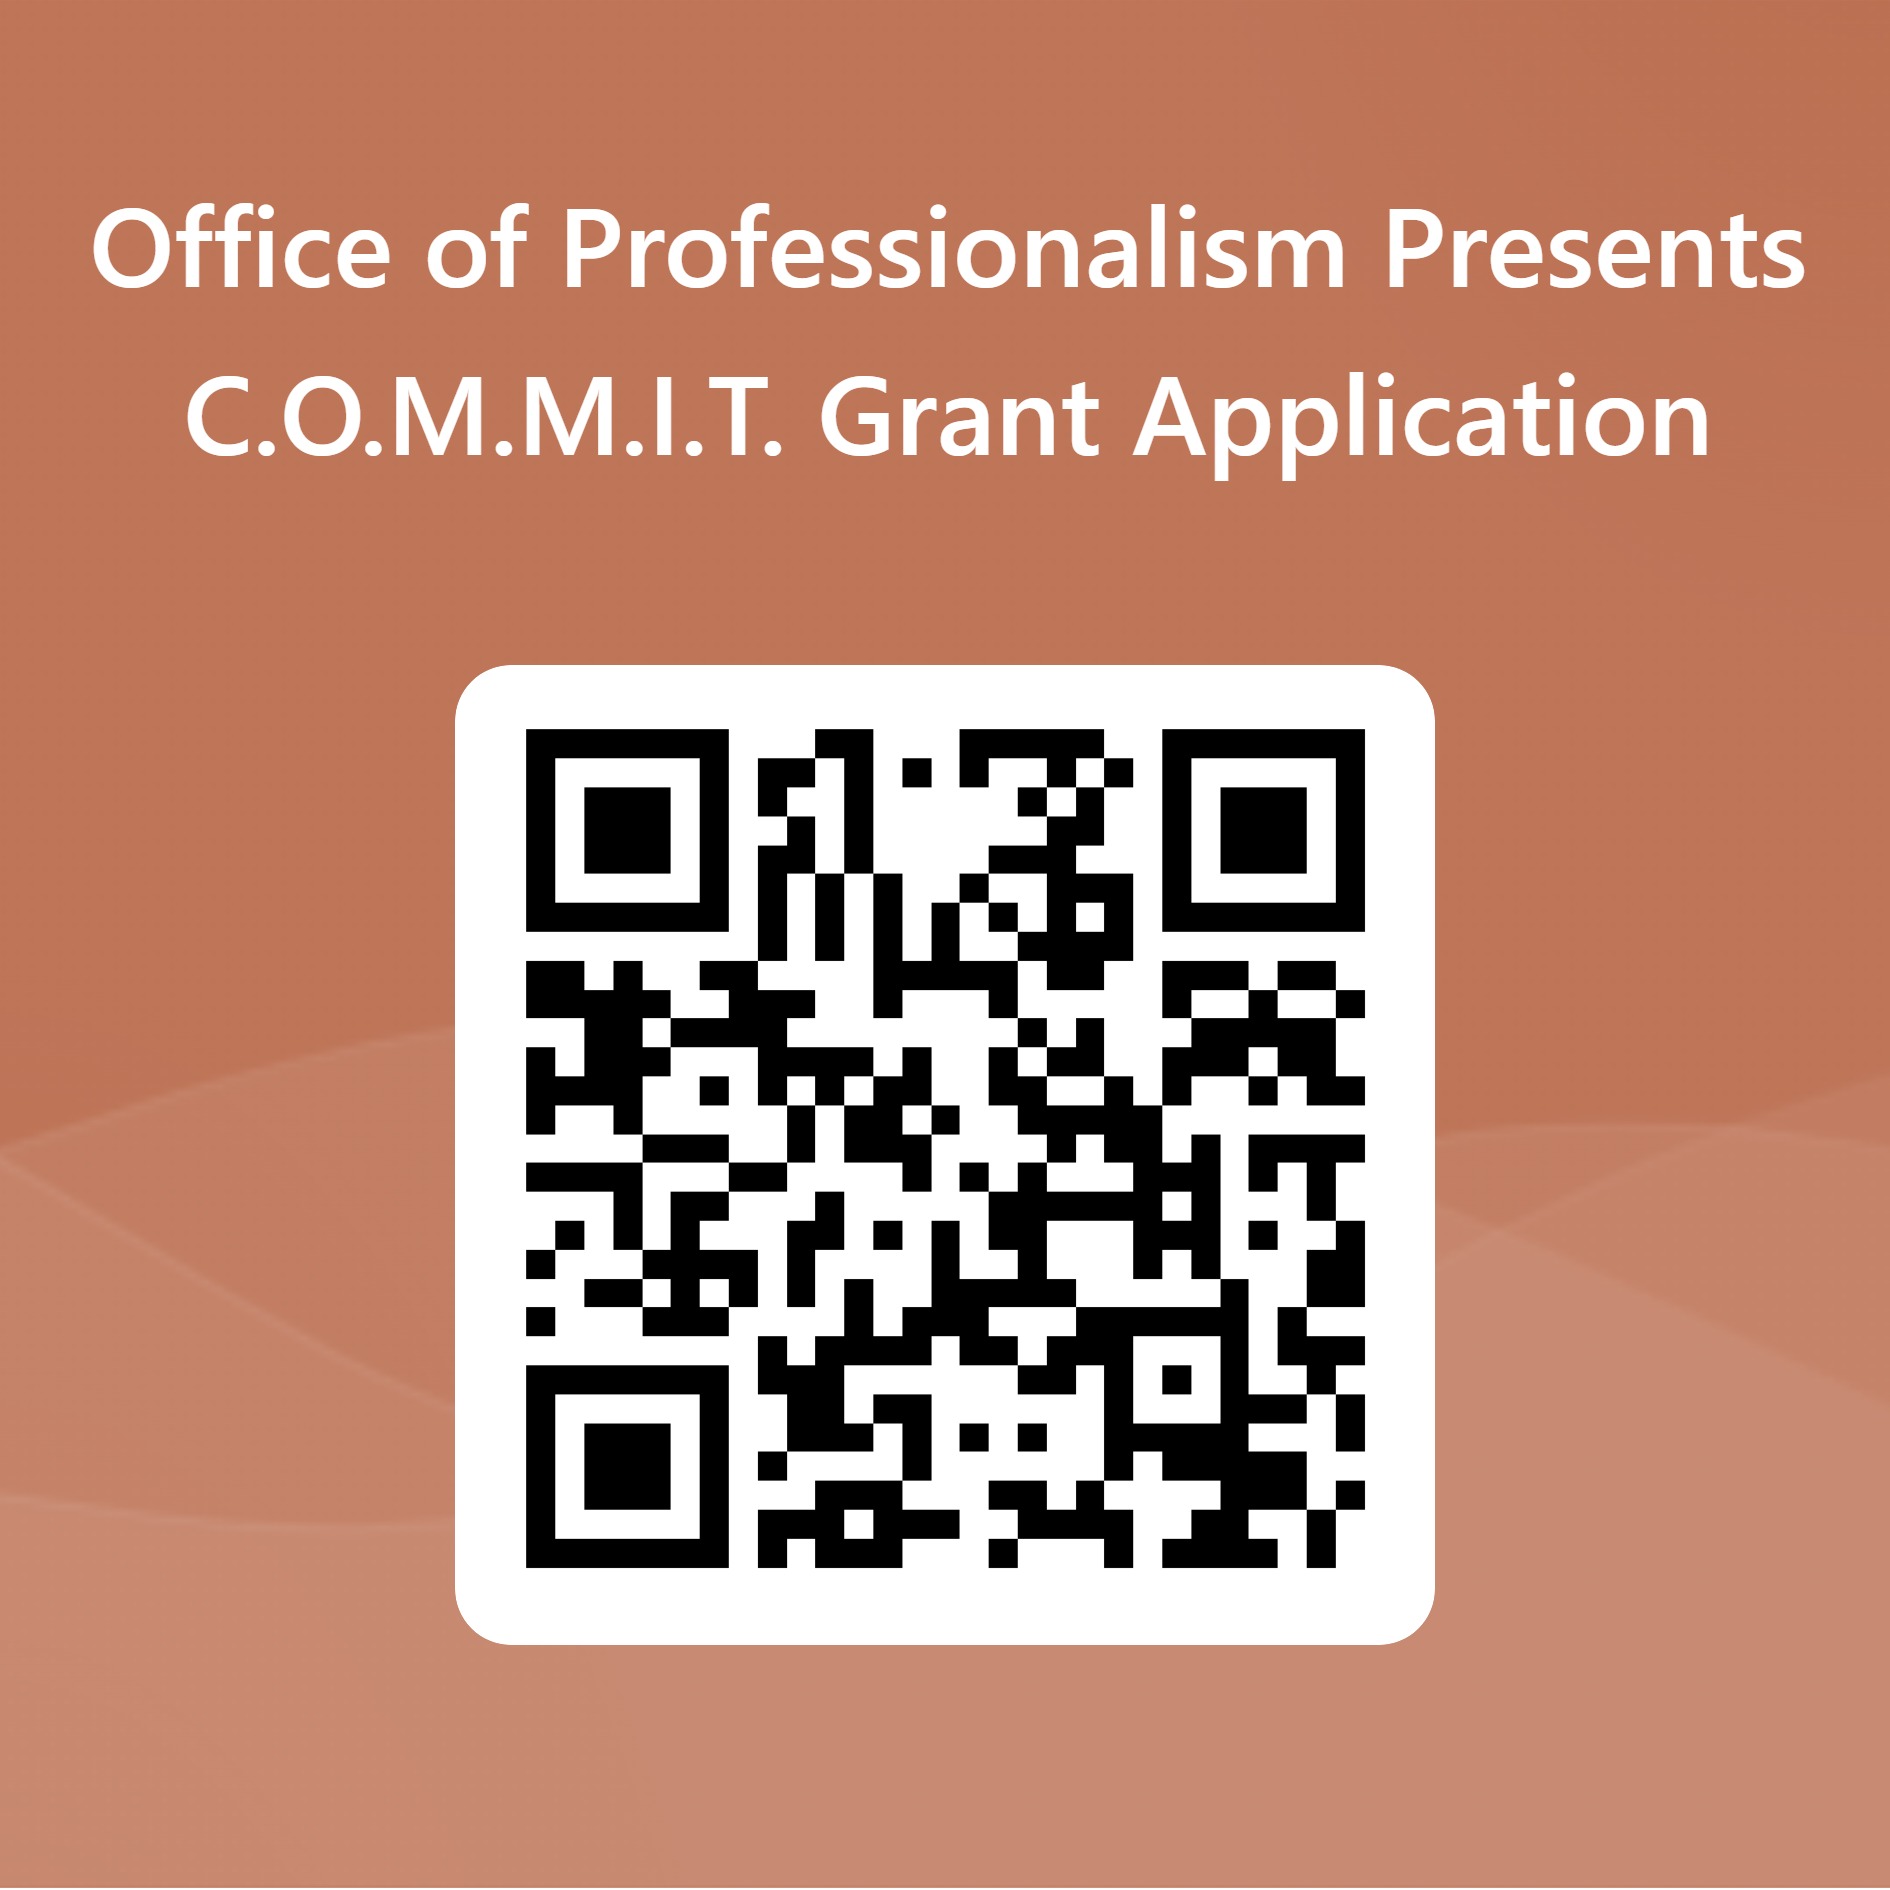 QR code for student organizations to access the COMMIT Grant application.